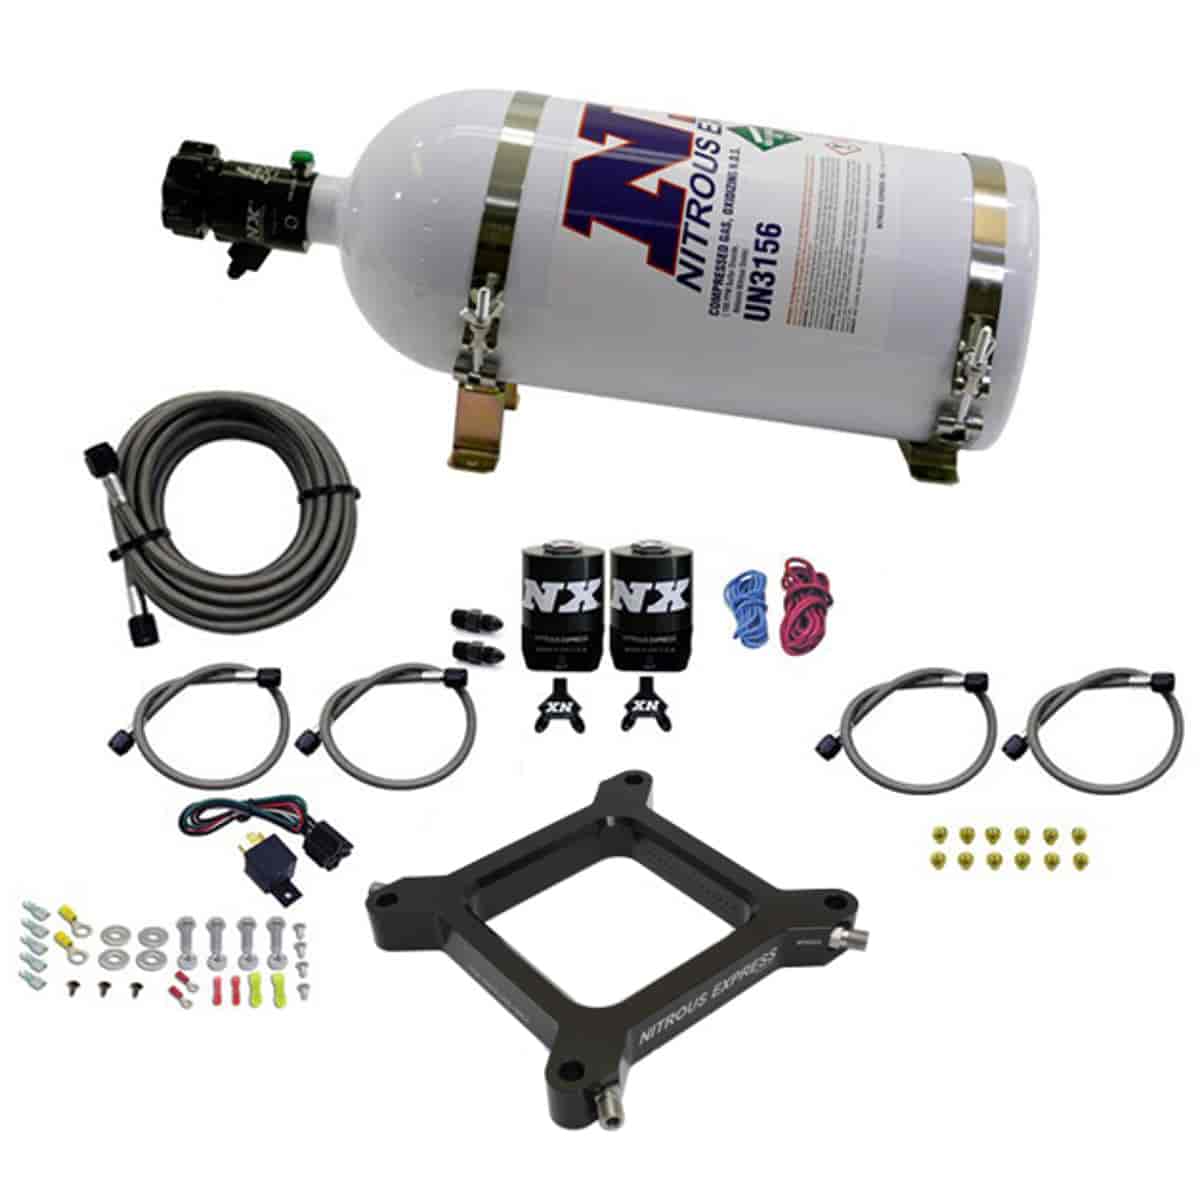 Assassin Nitrous Plate System [Holley 4150 Carb Spray